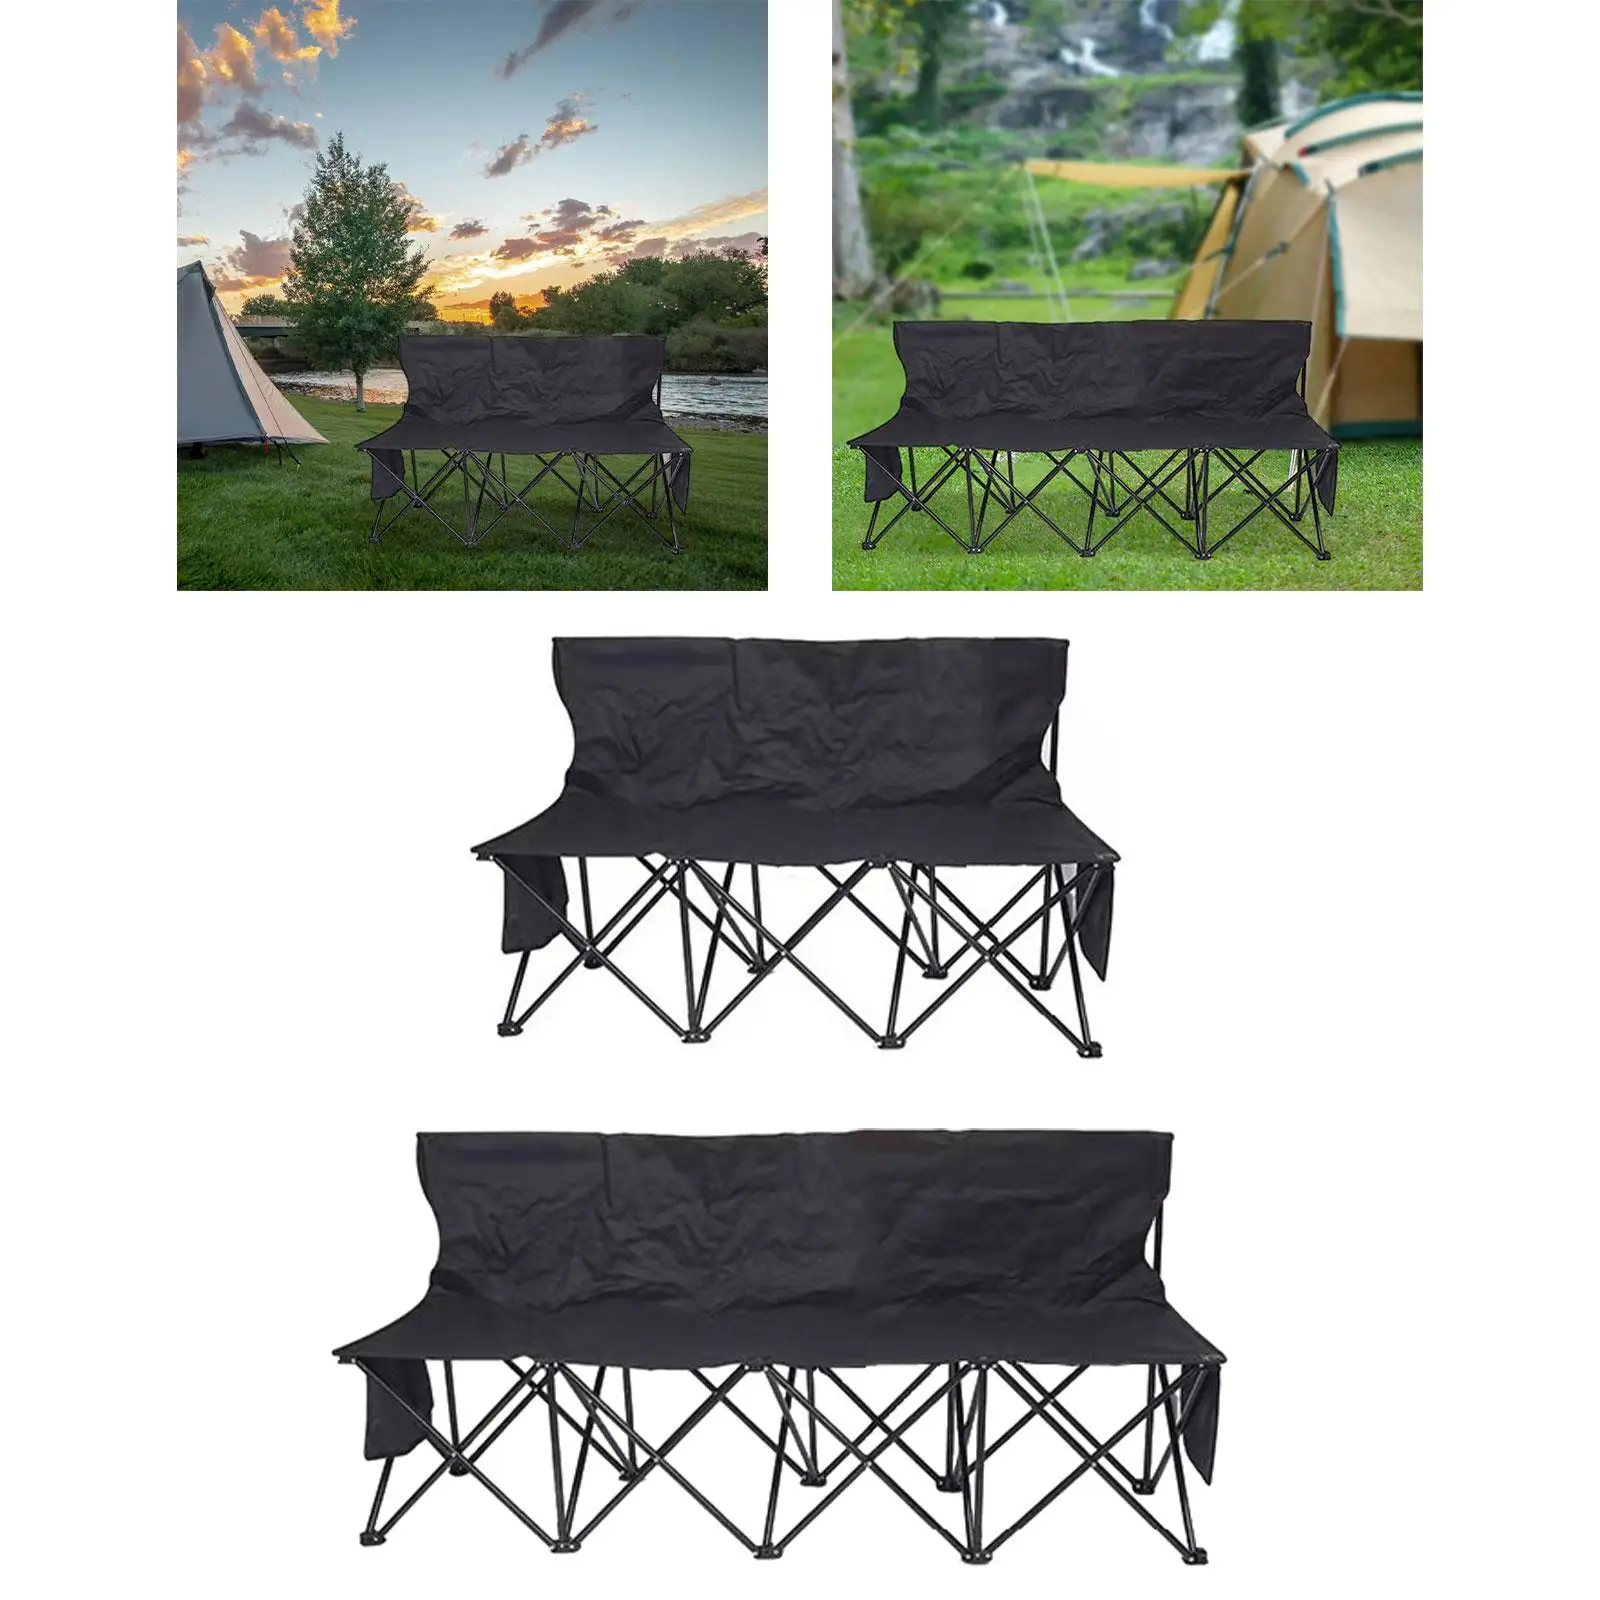 Folding Bench Chair Folding Camping Chair for Adults with Back Support Portable Sideline Bench Foldable for Sports Campsites